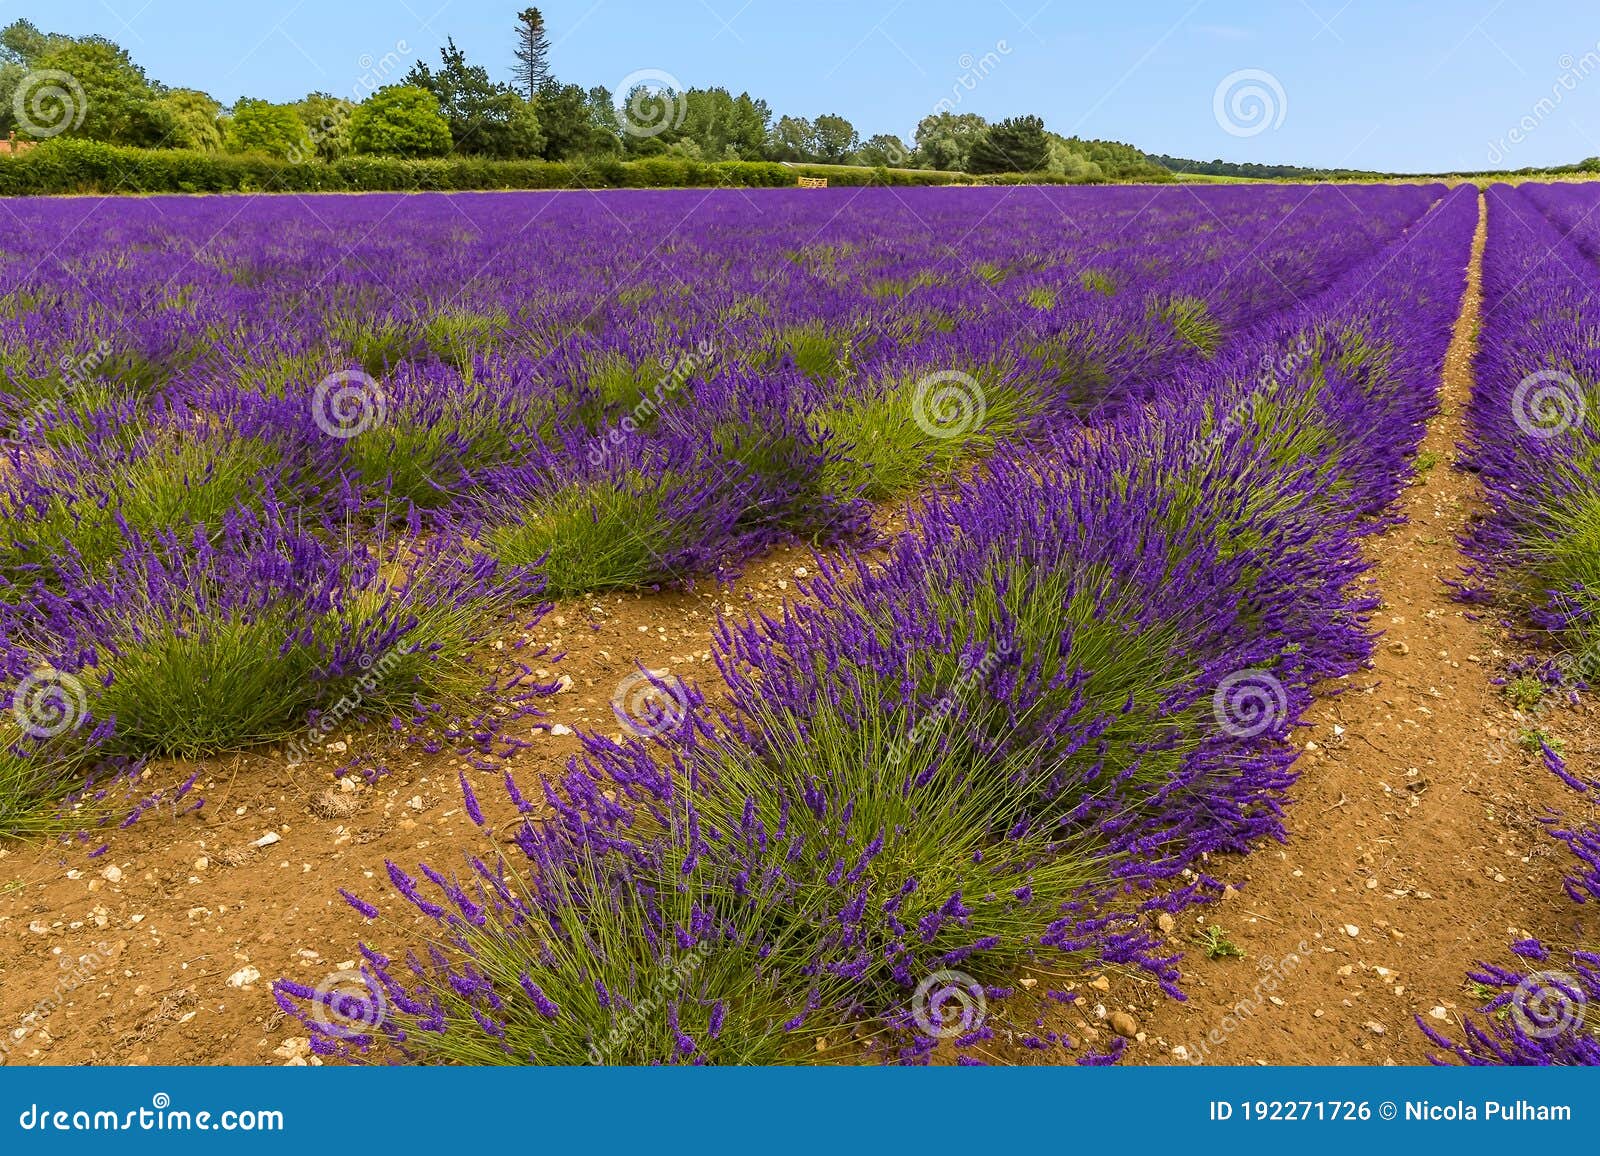 A View Across Lines of Purple Lavender Stretching Out To the Horizon in ...